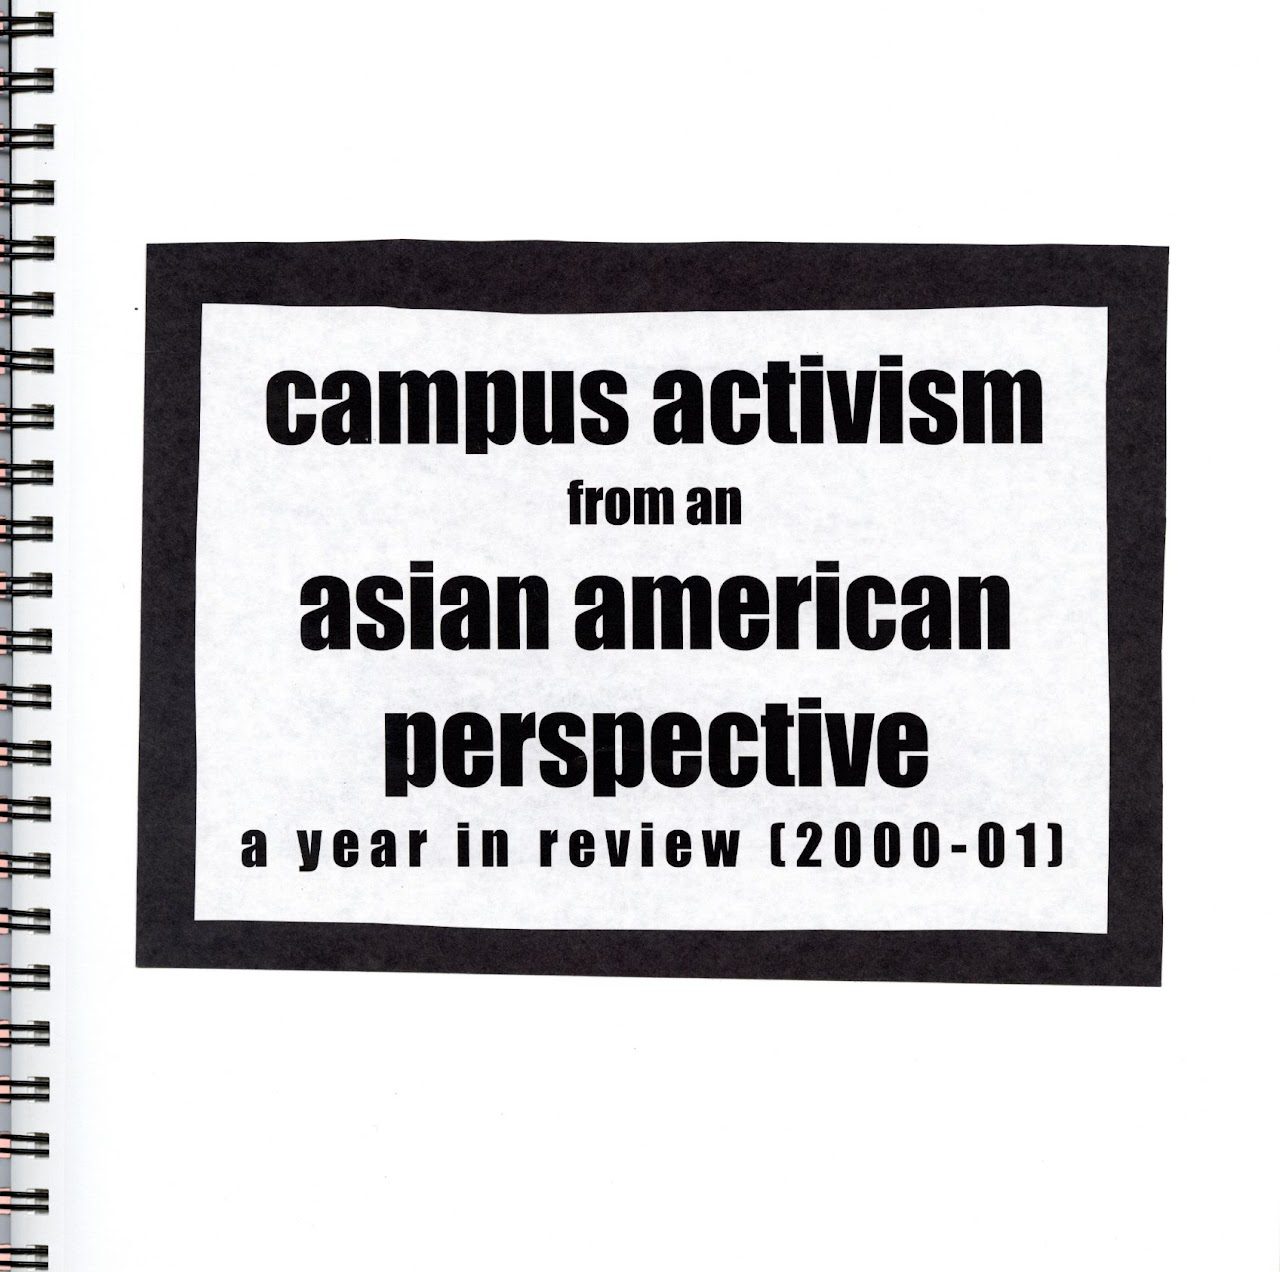 Scrapbook cover that reads "Campus activism from an asian american perspective, a year in review 2000-01